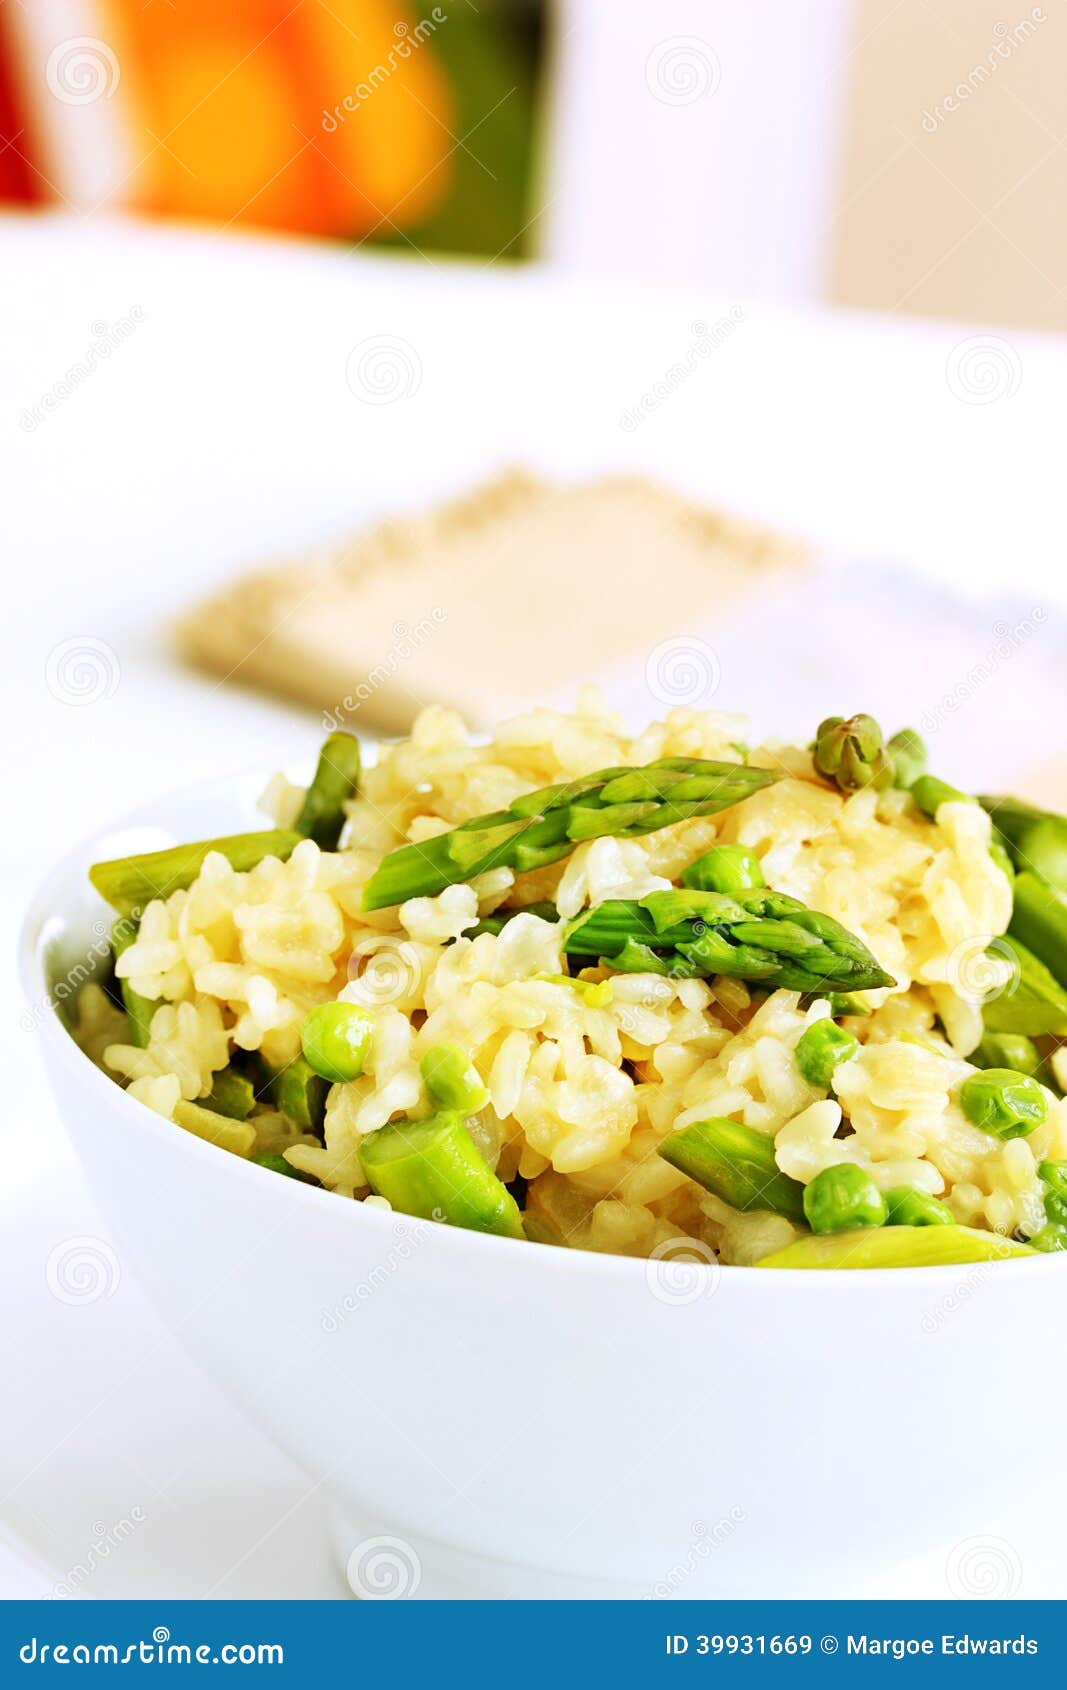 spring risotto